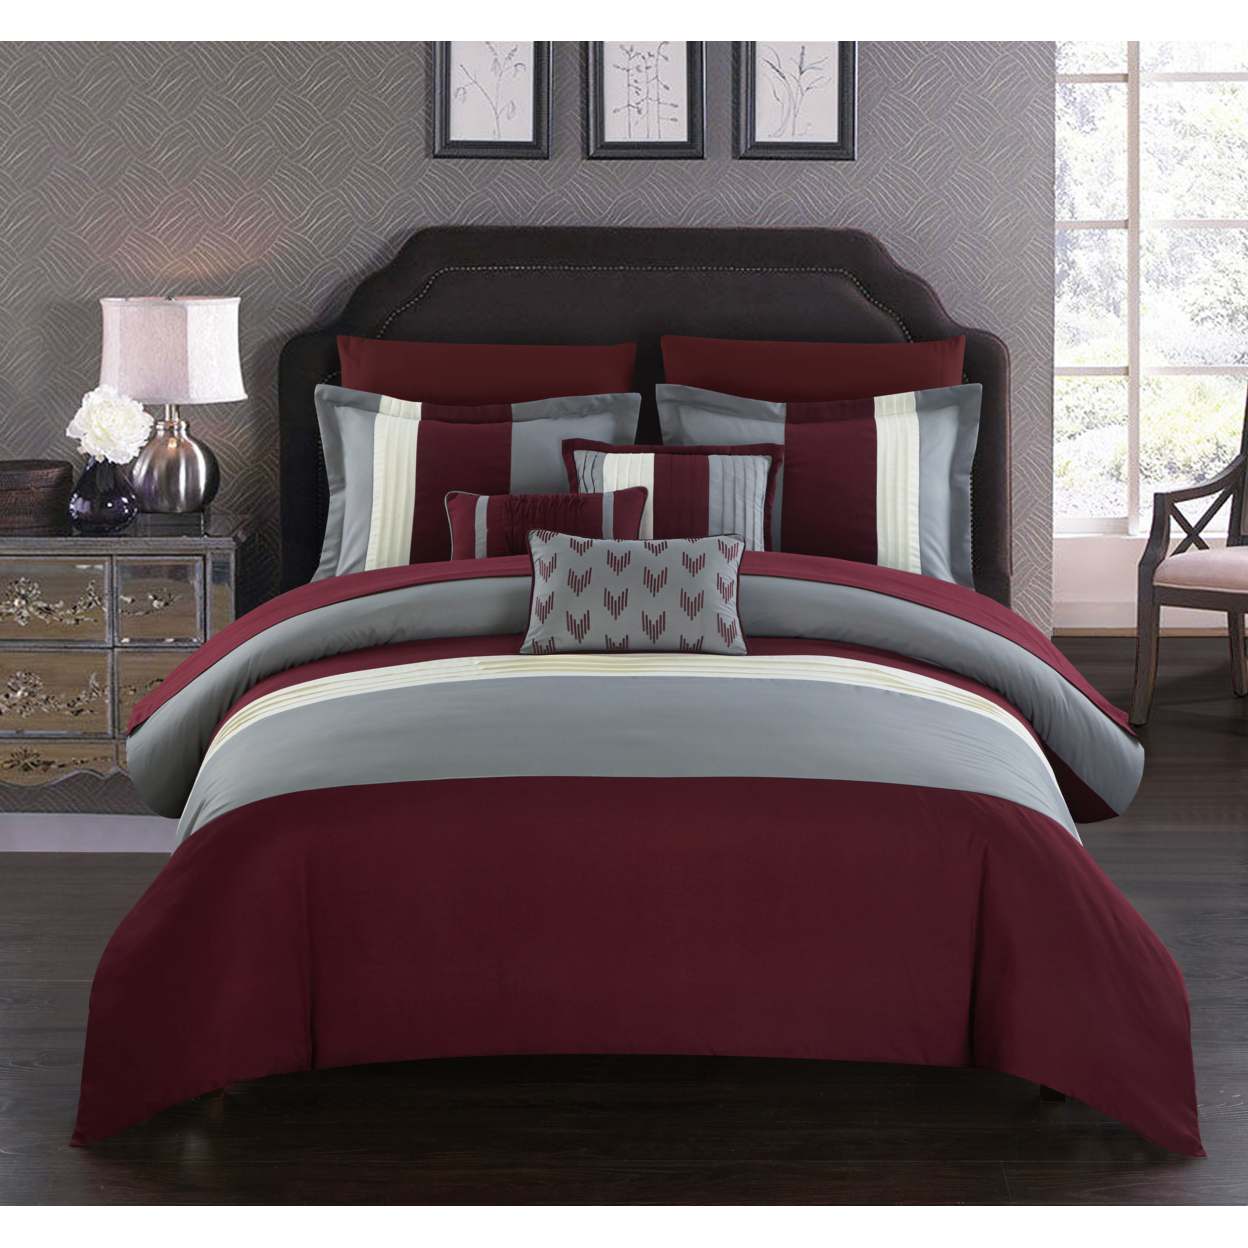 Rashi 10 Or 8 Piece Color Block Bed In A Bag Bedding And Comforter Set - Plum, Twin